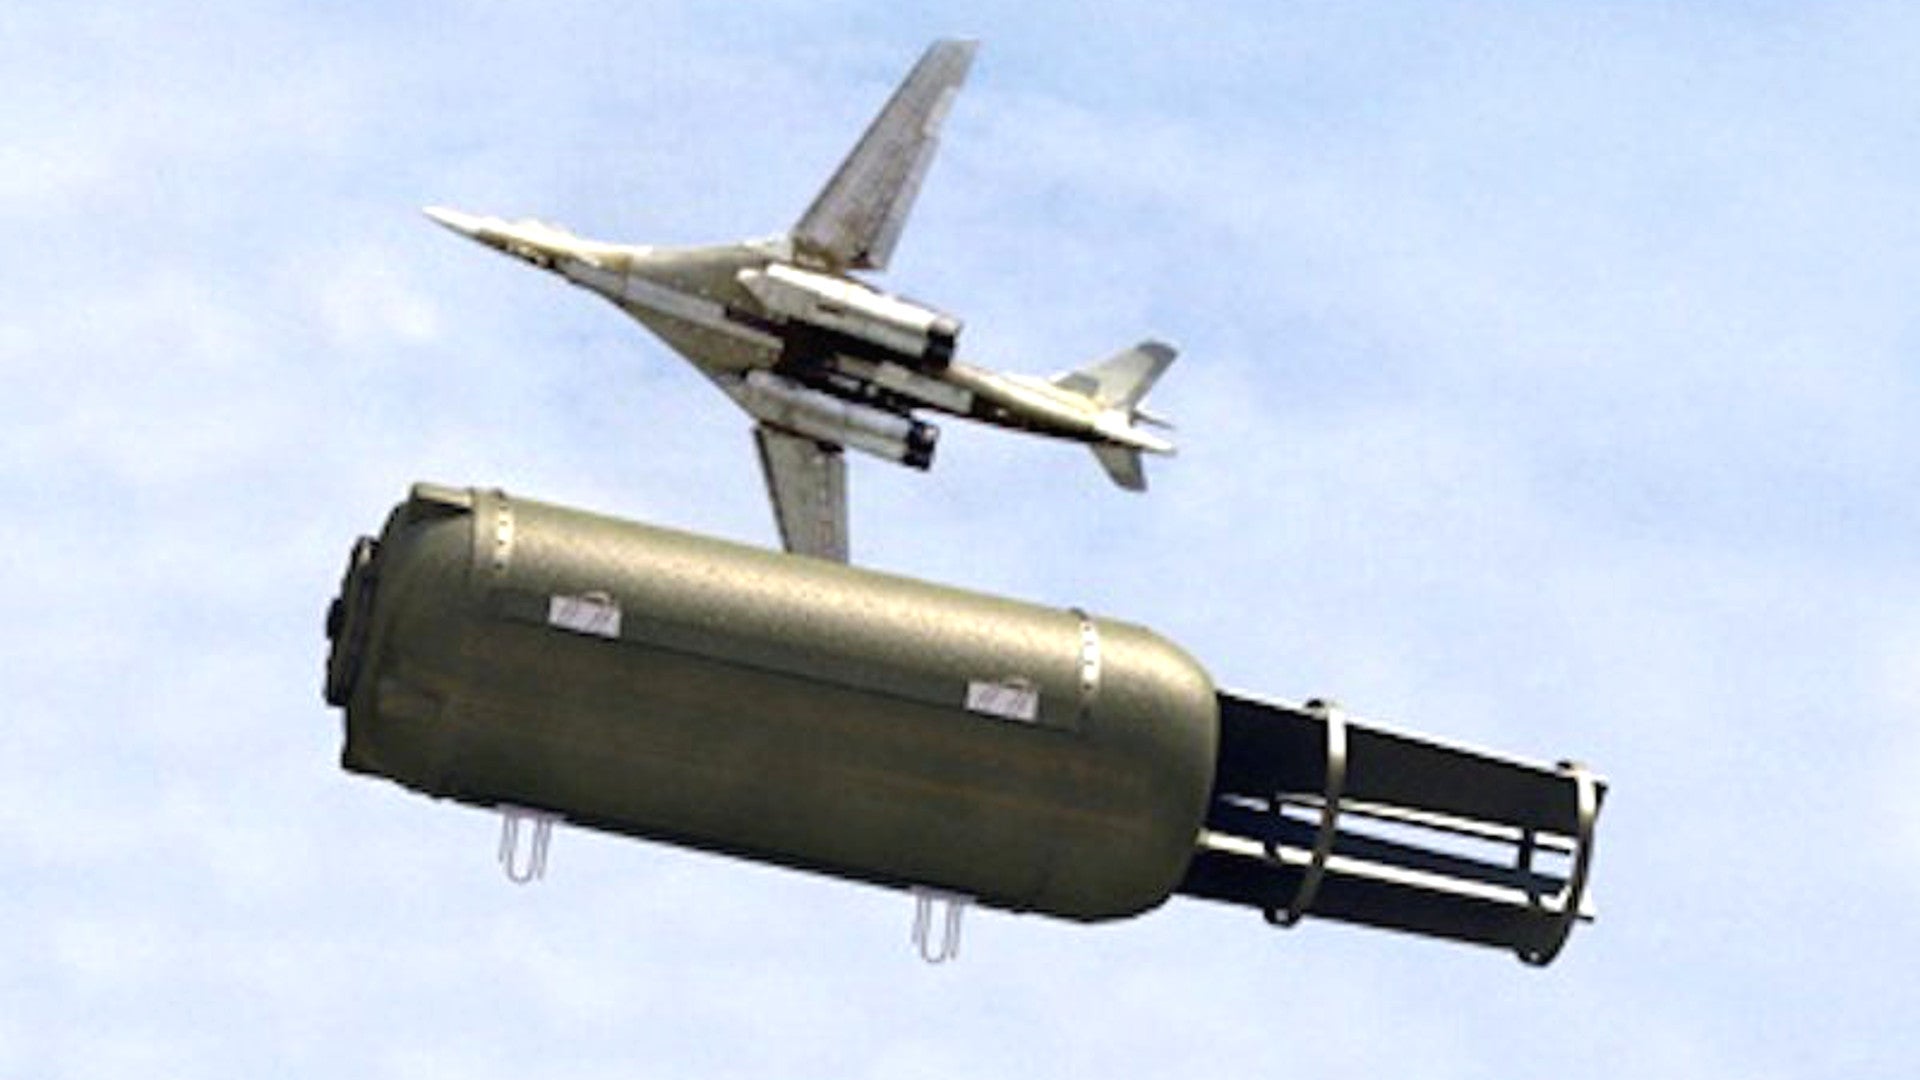 Rumors Fly That Russia Has Dropped “The Father of All Bombs” in Syria